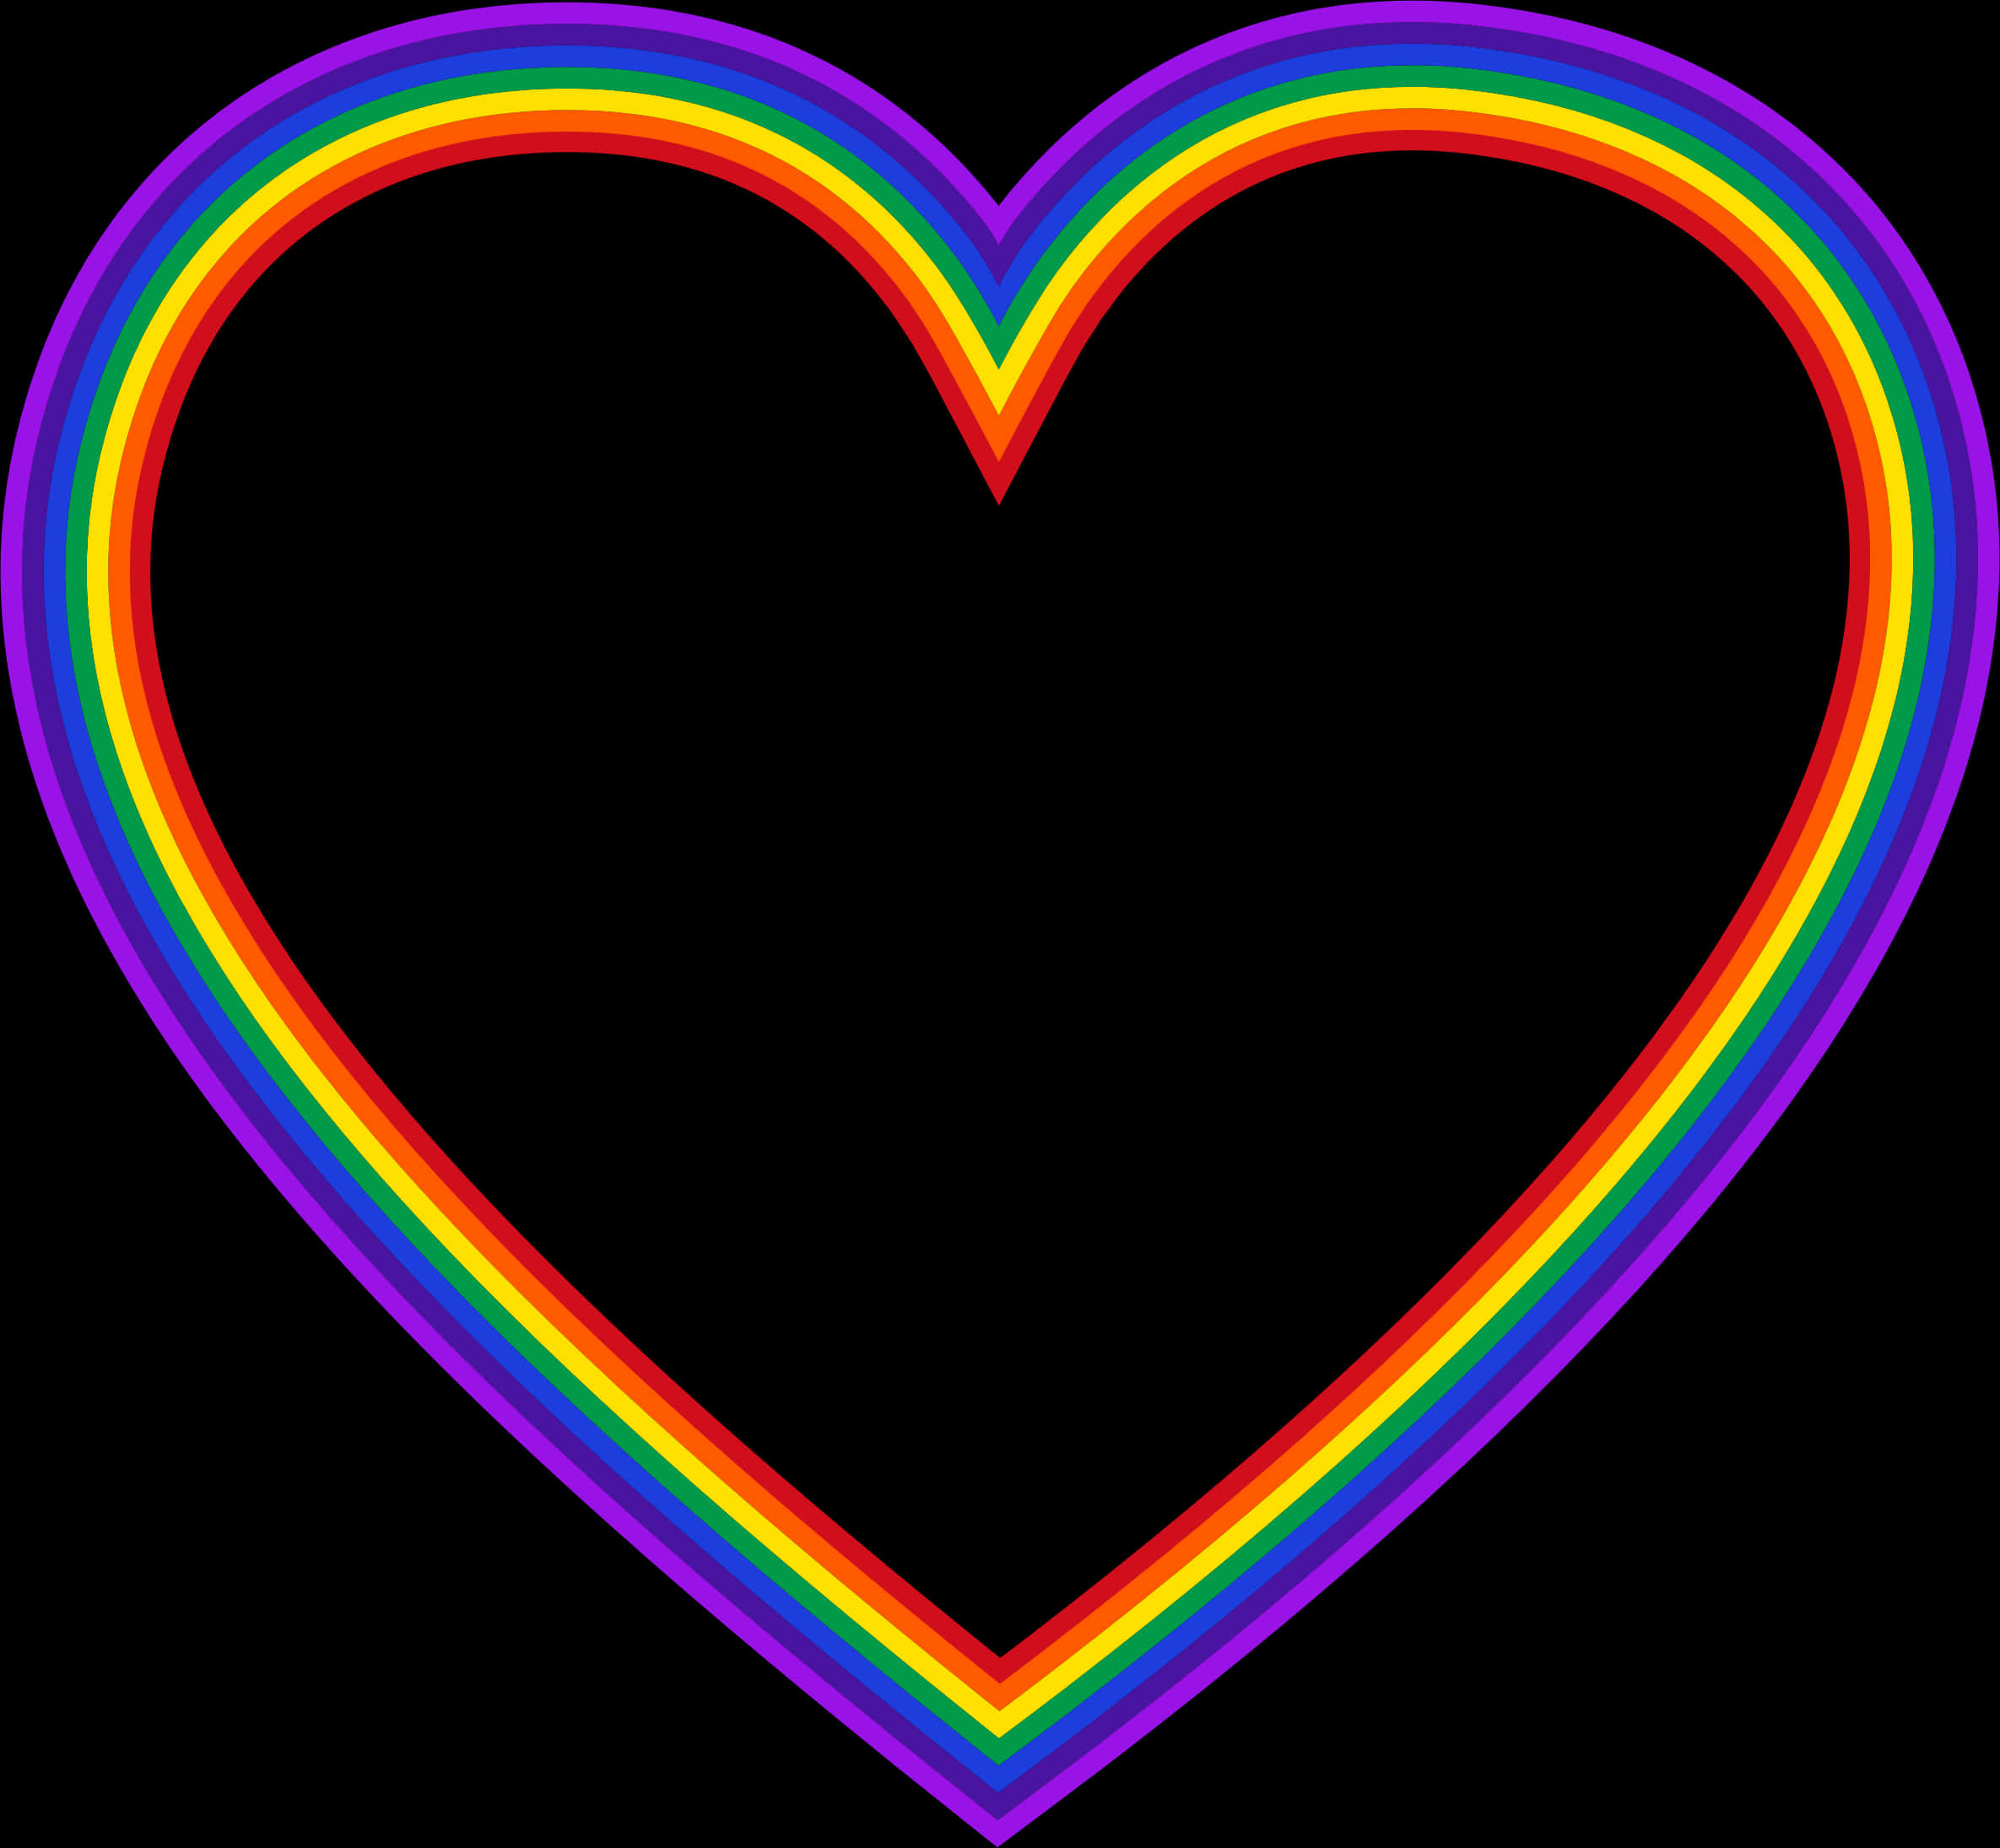 A Rainbow Colored Heart On A Black Background